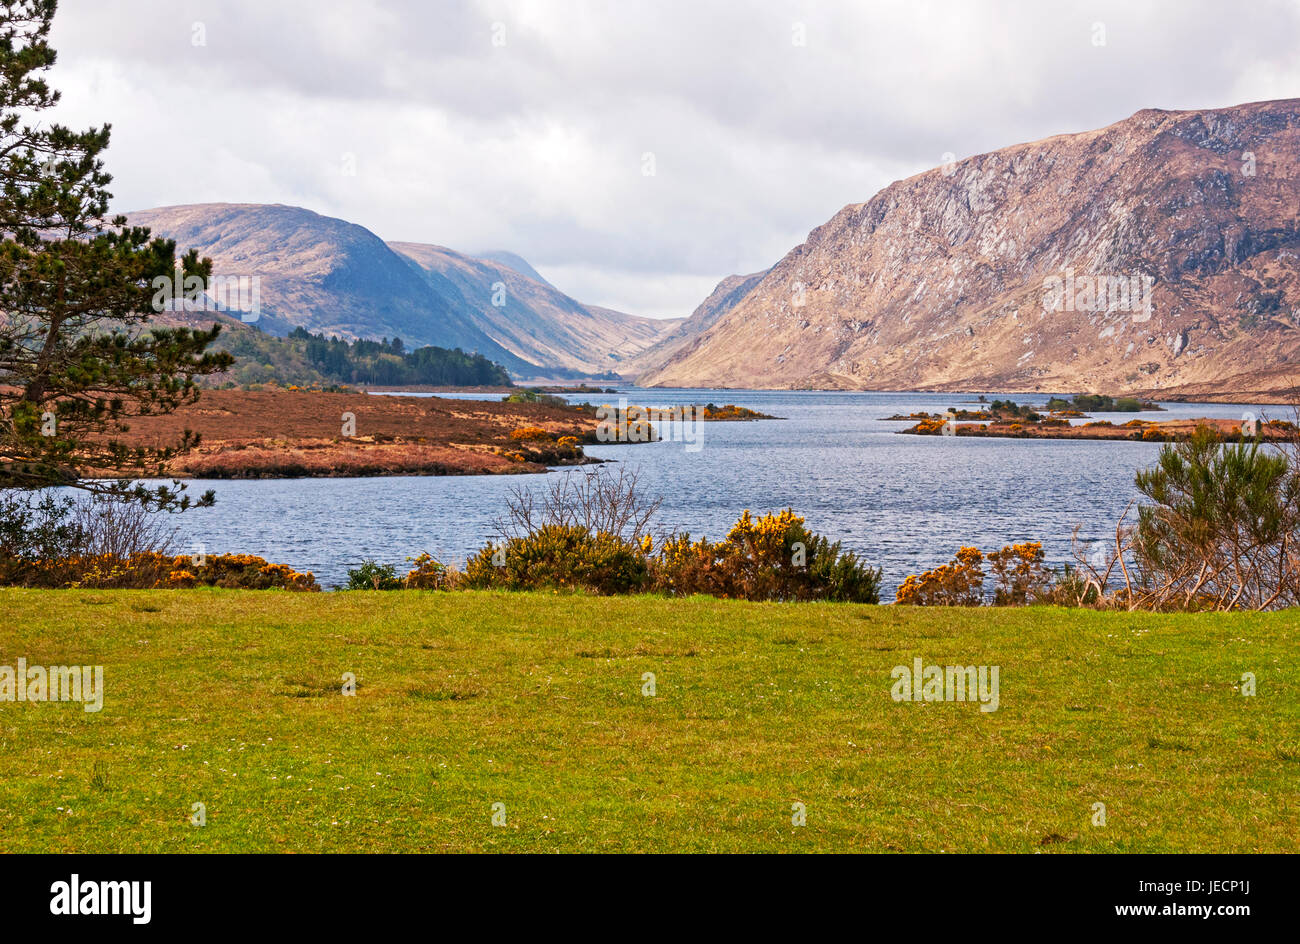 Berge und See, Glenveagh National Park, County Donegal, Irland Stockfoto